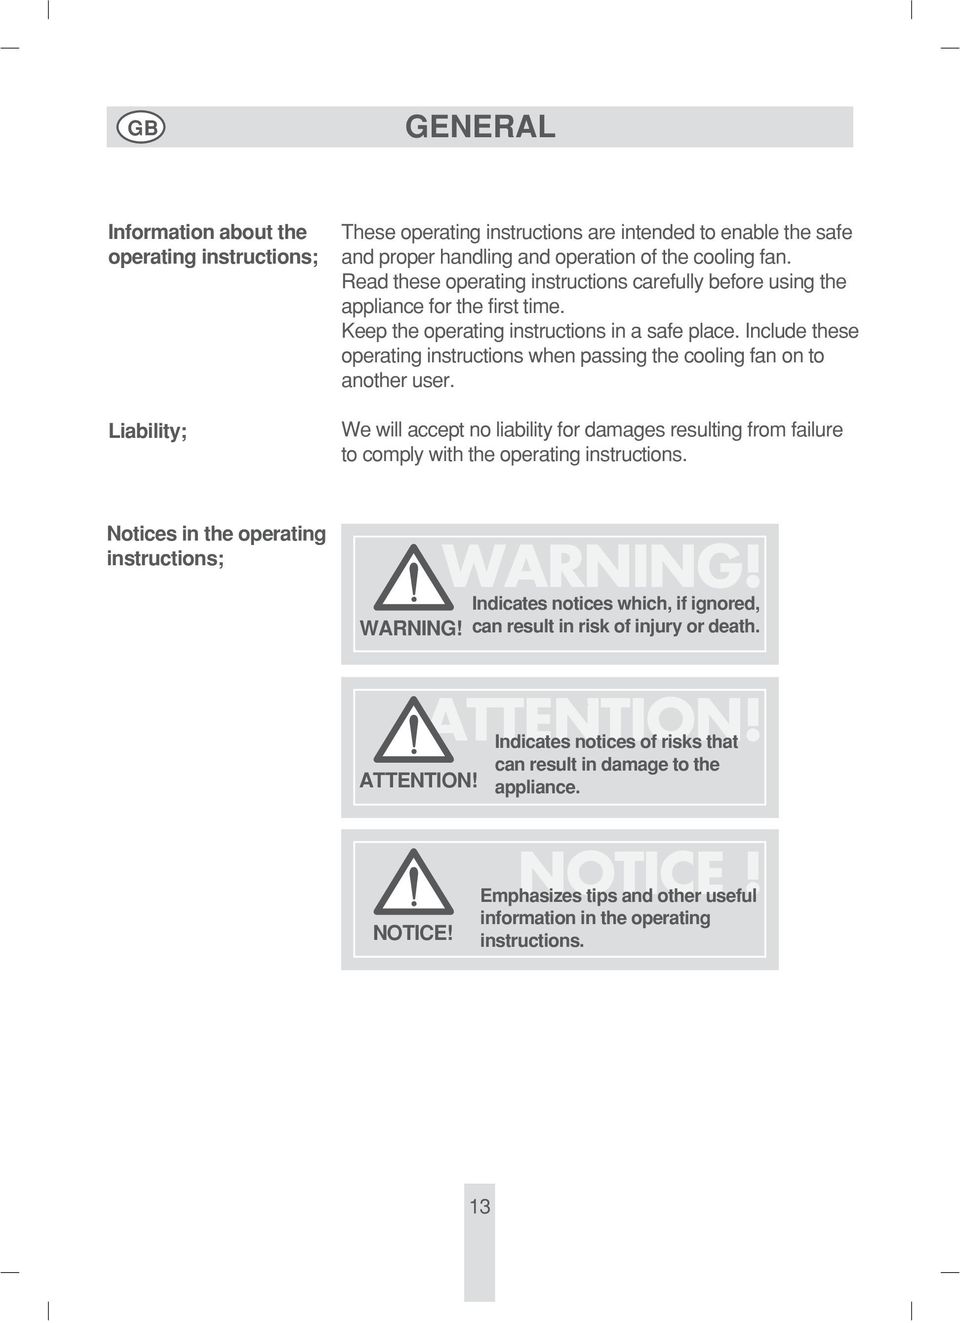 Include these operating instructions when passing the cooling fan on to another user. We will accept no liability for damages resulting from failure to comply with the operating instructions.